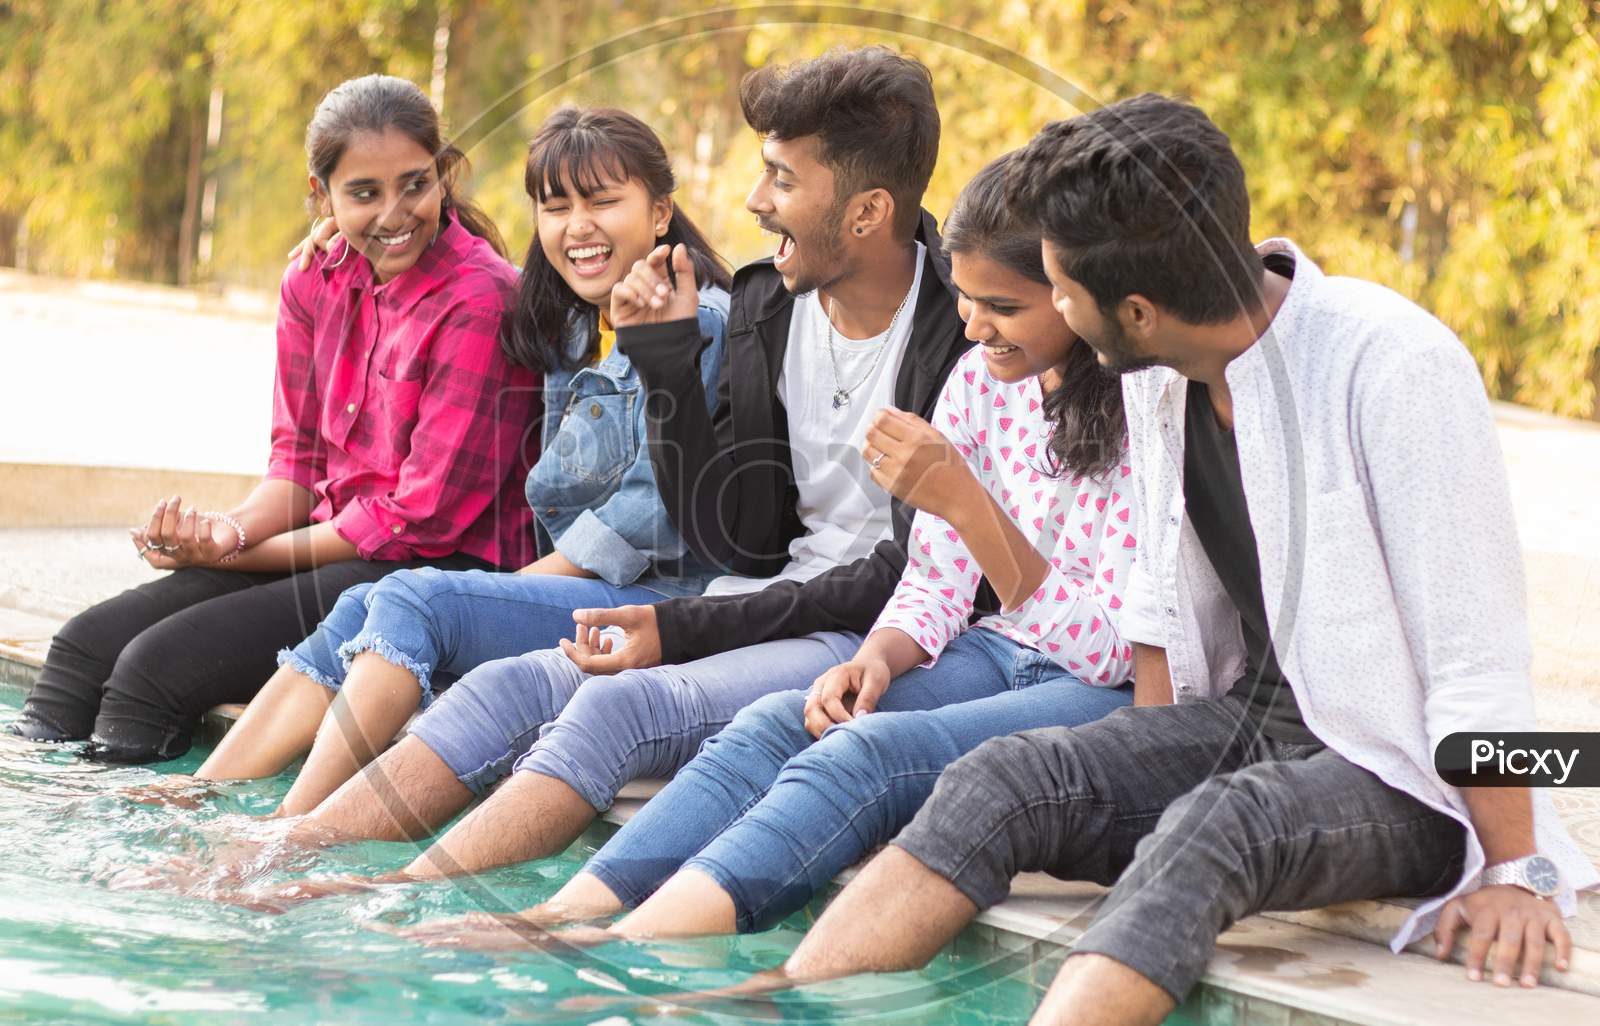 A Group of Happy Young People Talking to each other At Outdoors in a Pool